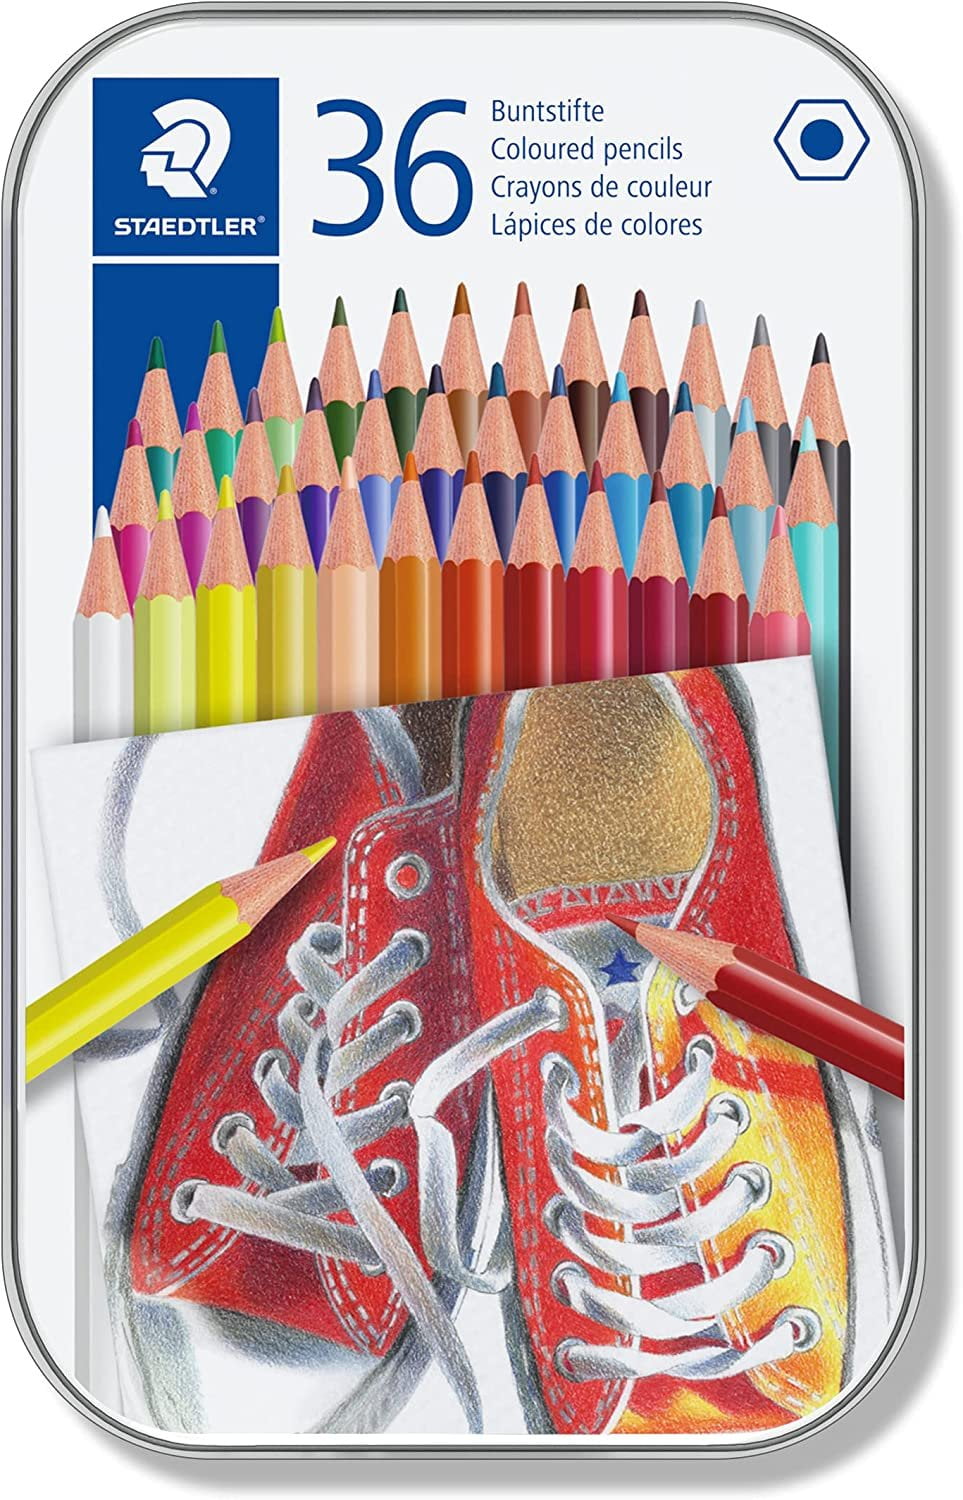 175 Piece Deluxe Art Set with 2 Drawing Pads, Acrylic Paints, Crayons,  Colored